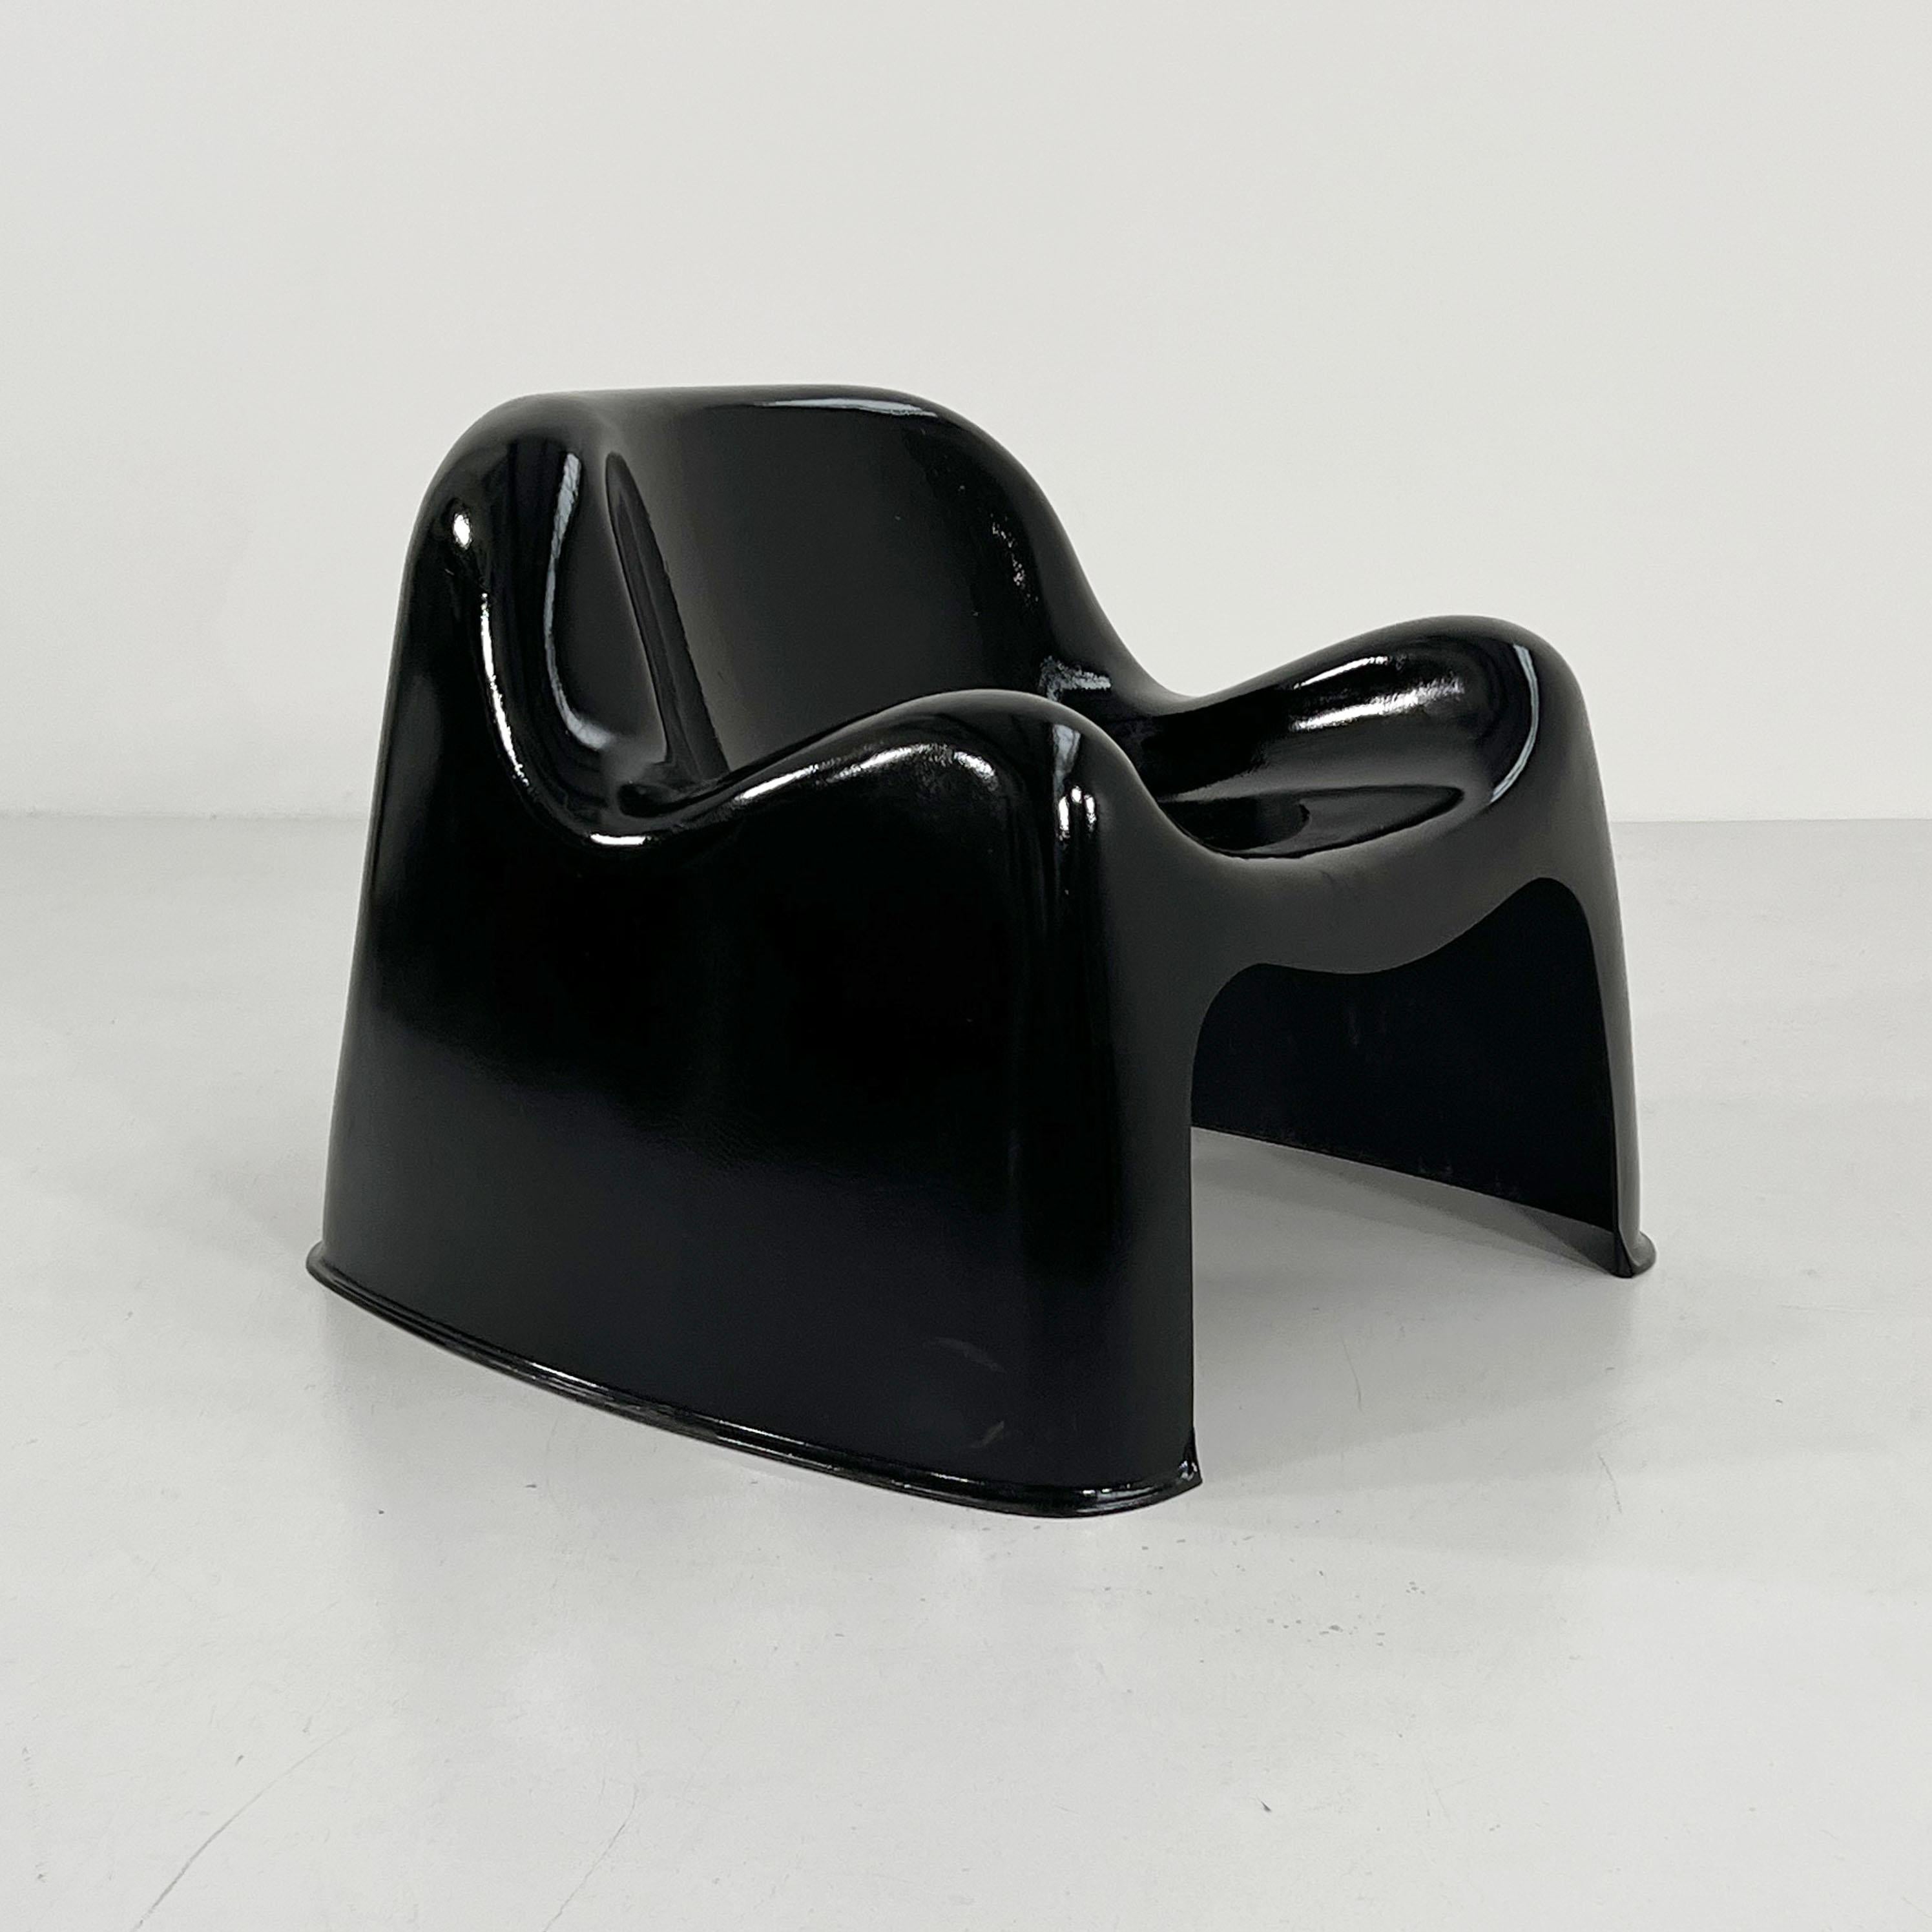 Designer - Sergio Mazza
Producer - Artemide
Model - Toga Chair
Design Period - Sixties
Measurements - Width 73 cm x Depth 70 cm x Height 62 cm x Seat Height 37 cm
Materials - Plastic
Color - Black
Light wear consistent with age and use. Paint